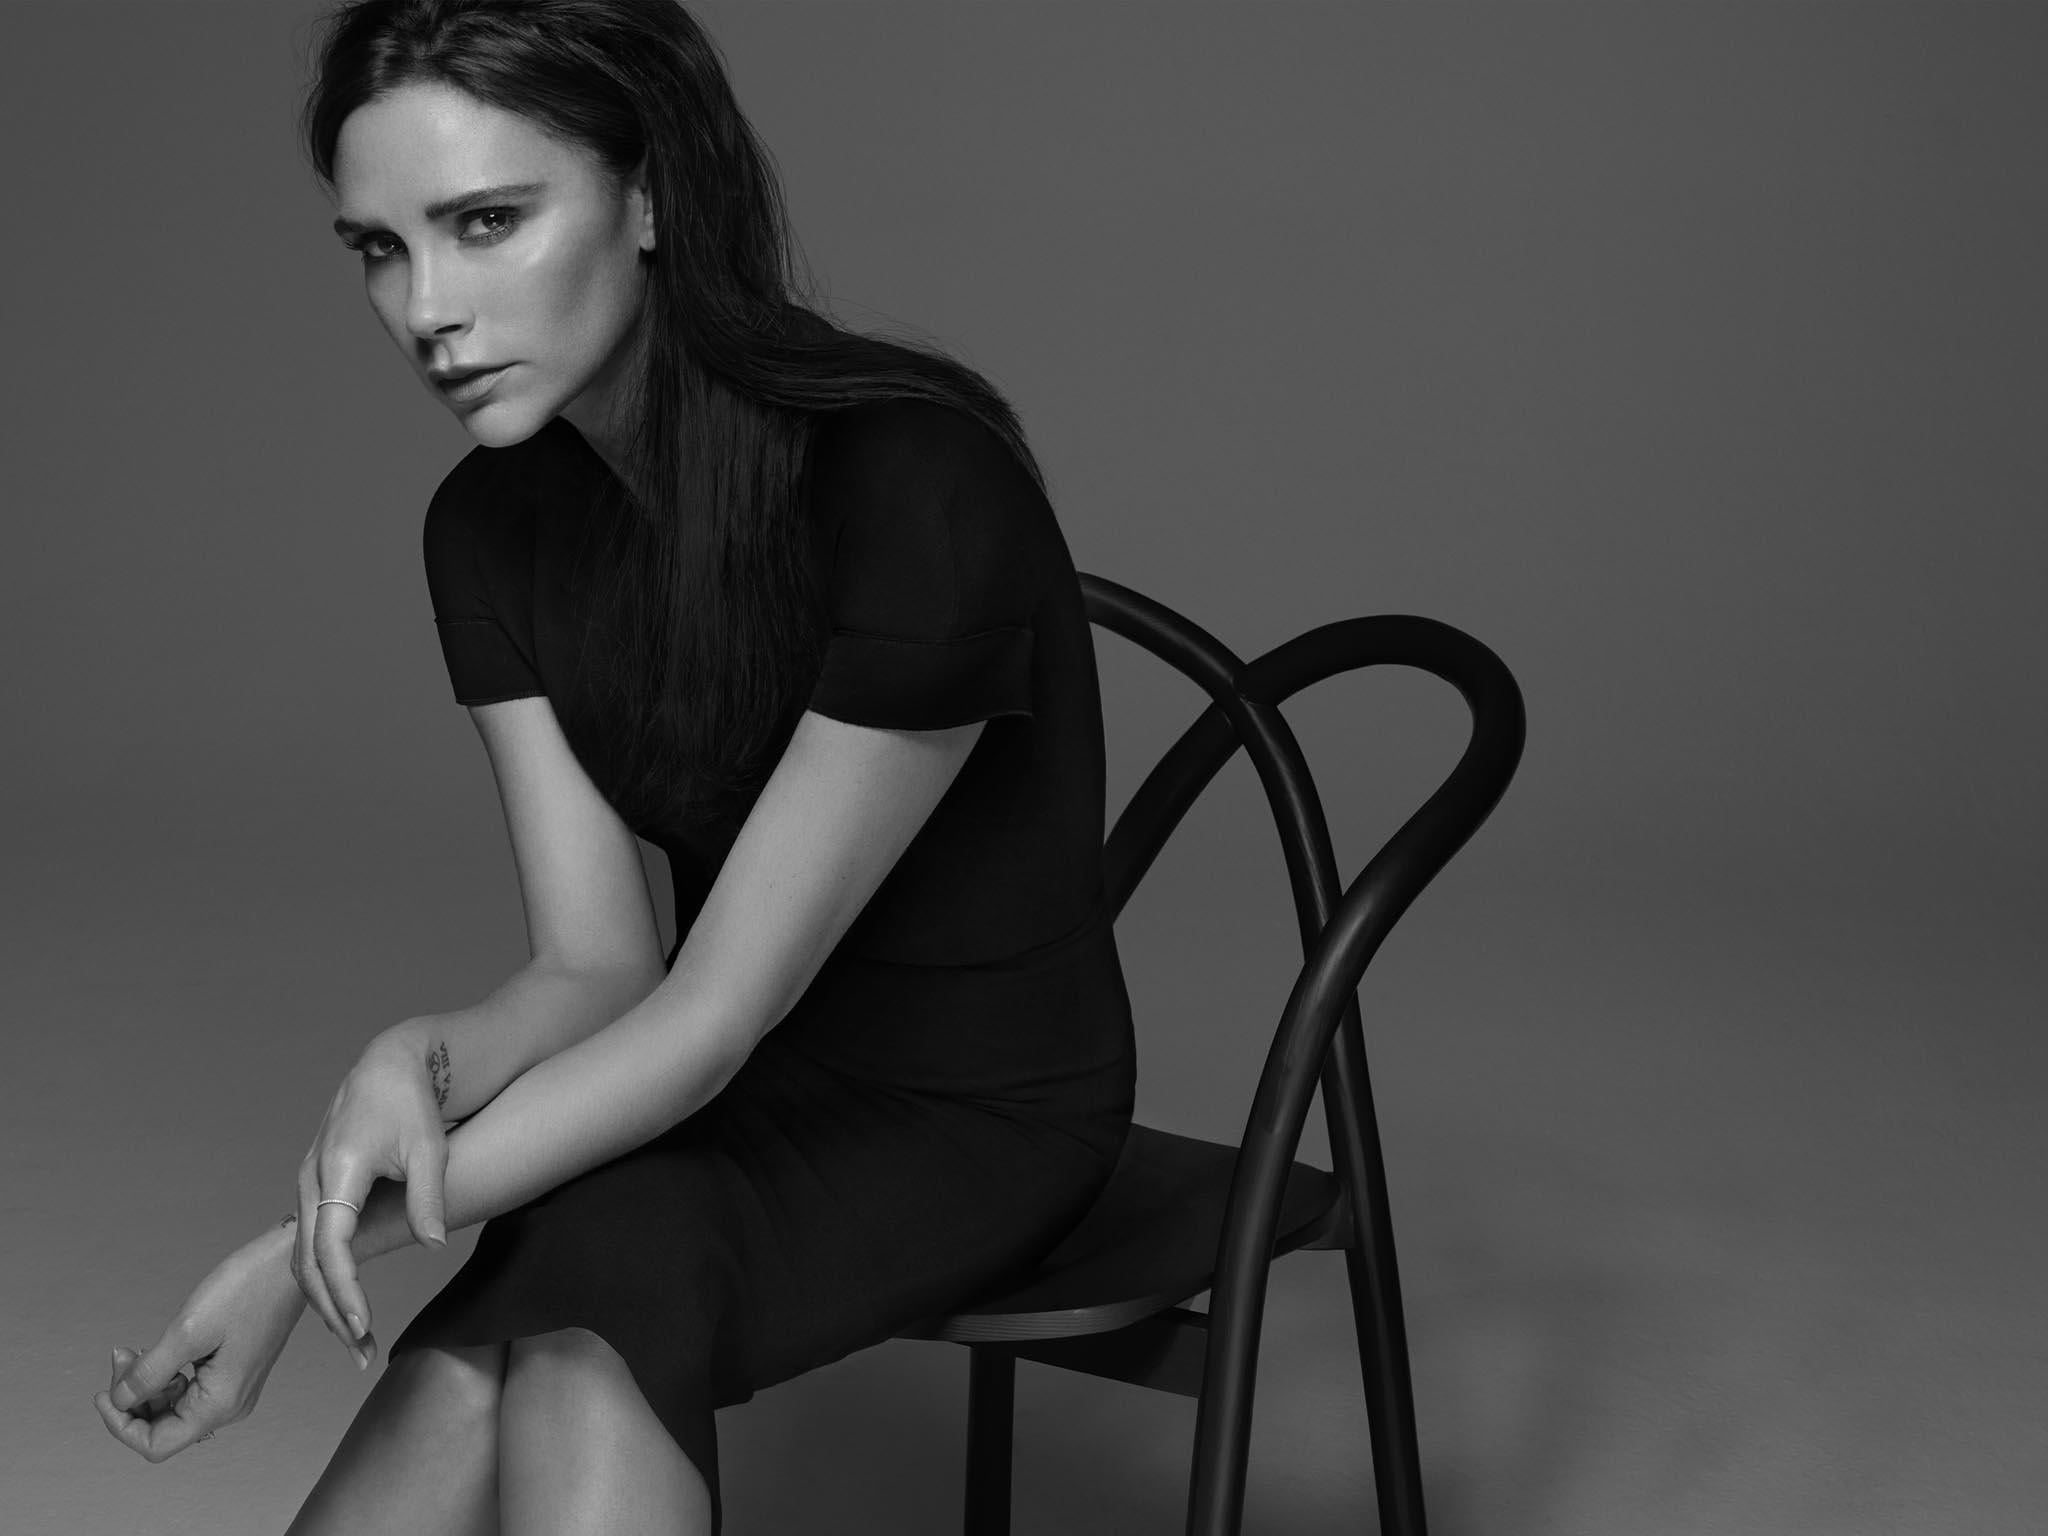 Victoria Beckham has previously launched a make-up collection with Estee Lauder